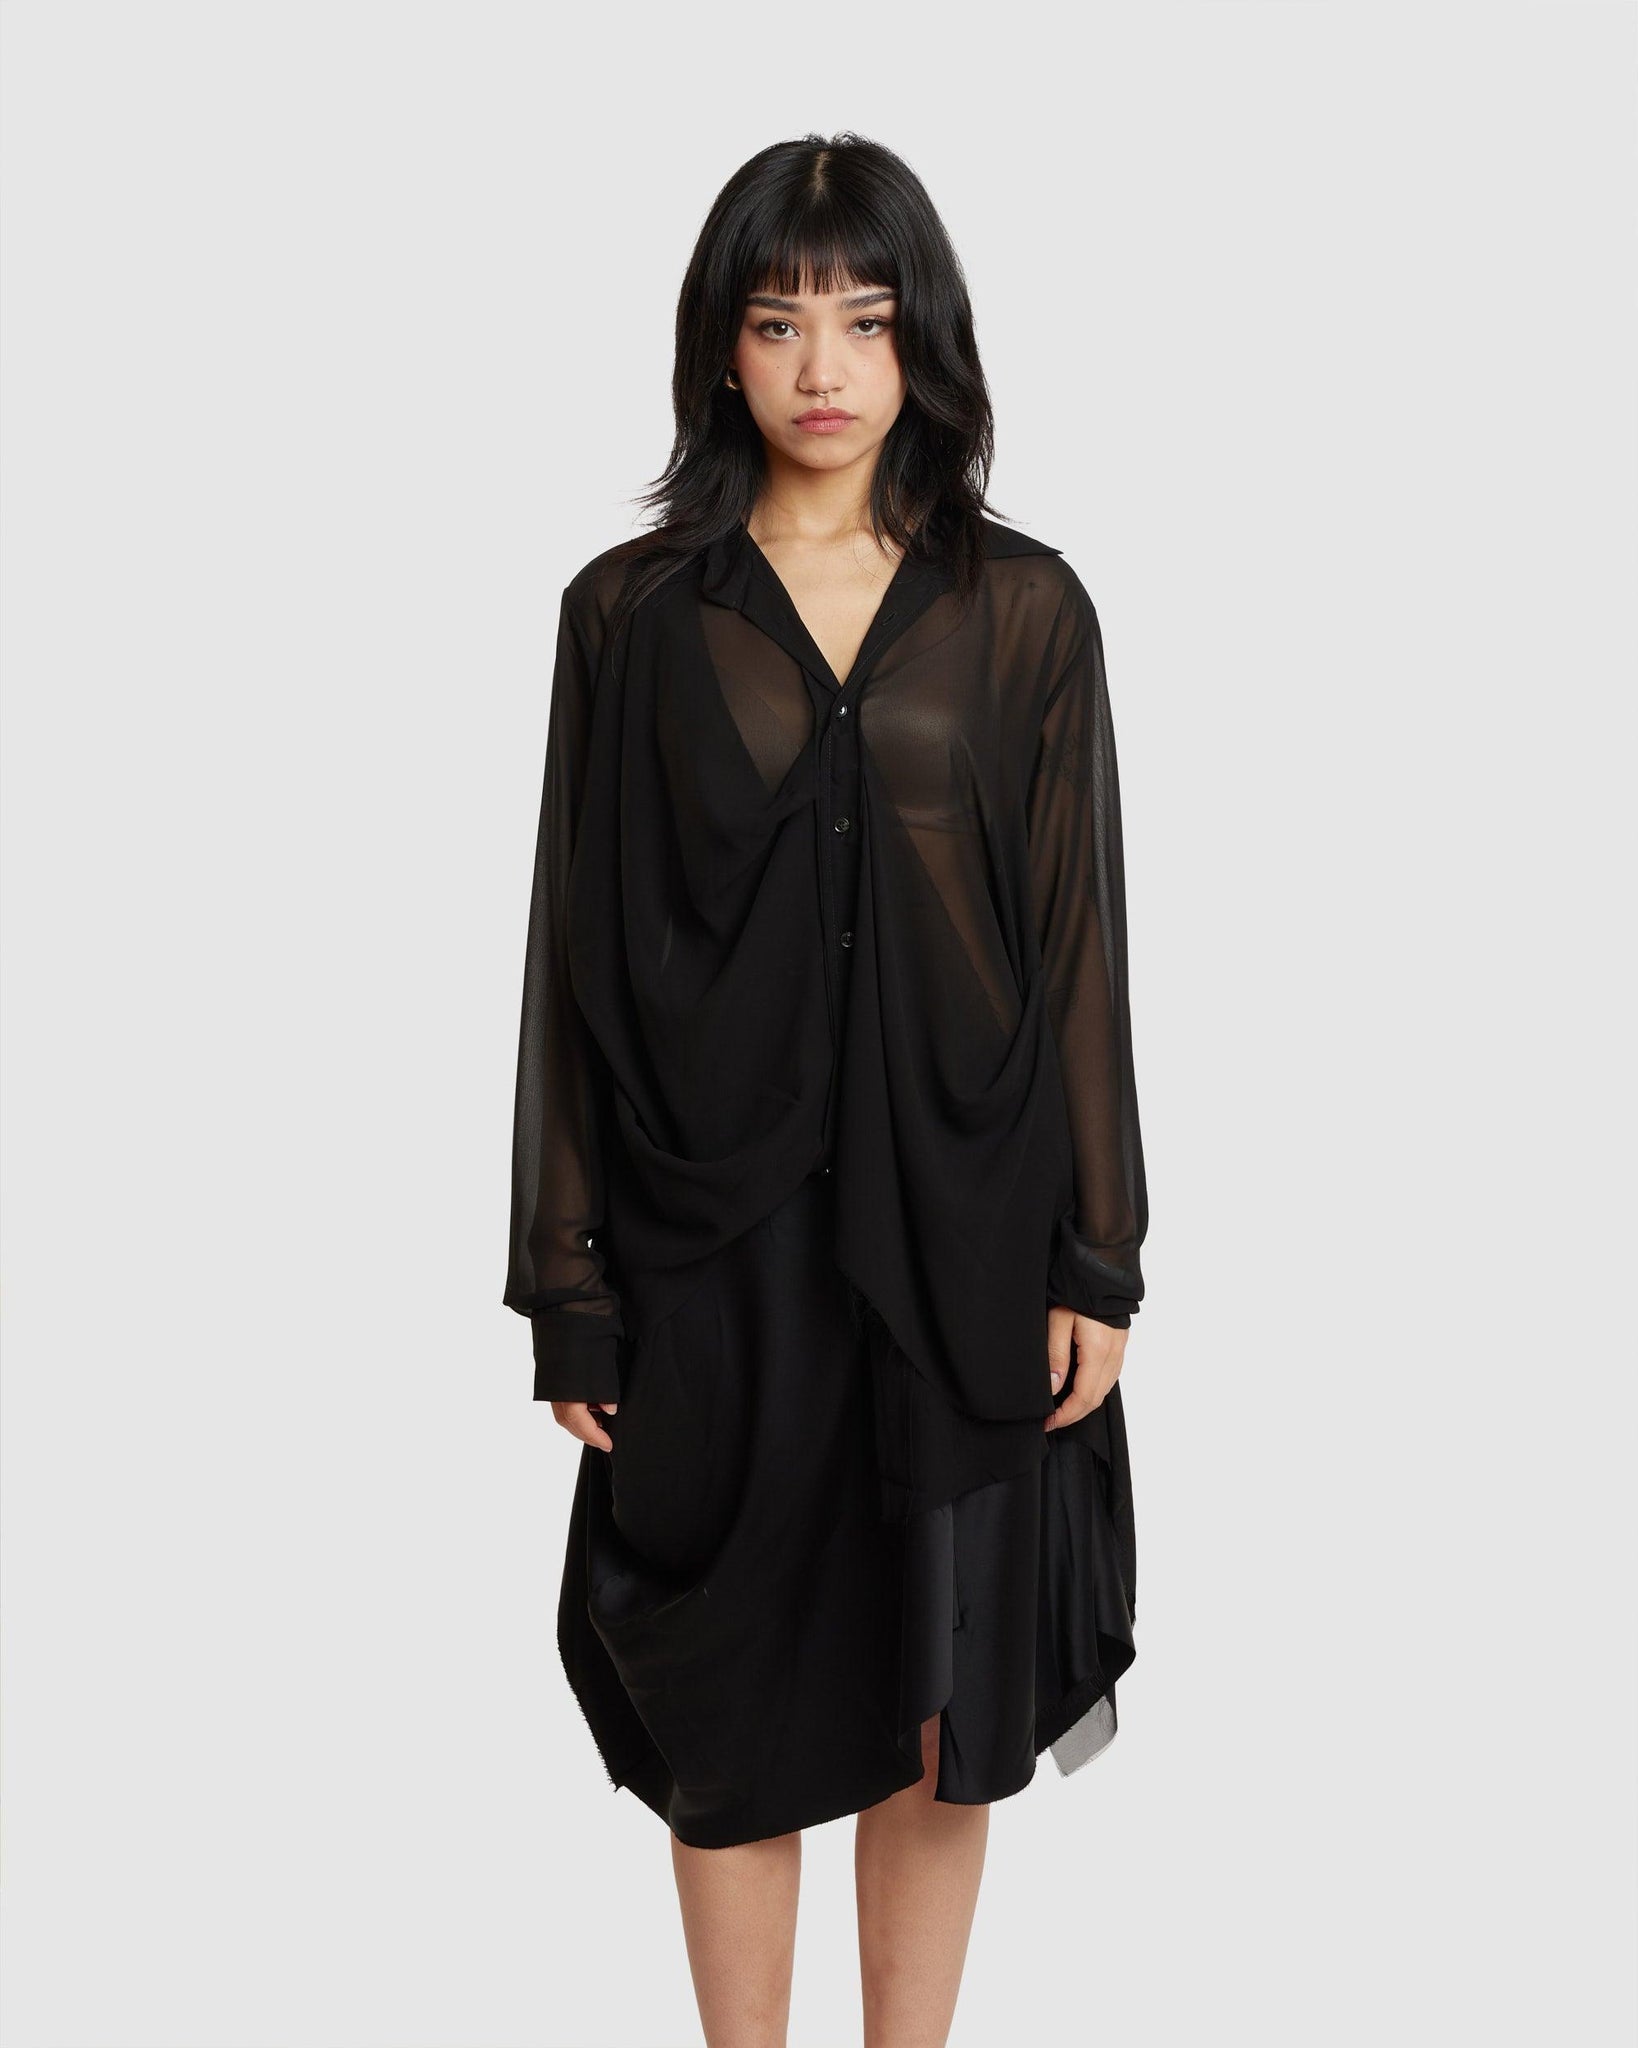 Saggy Draped Pkt Shirt - {{ collection.title }} - Chinatown Country Club 